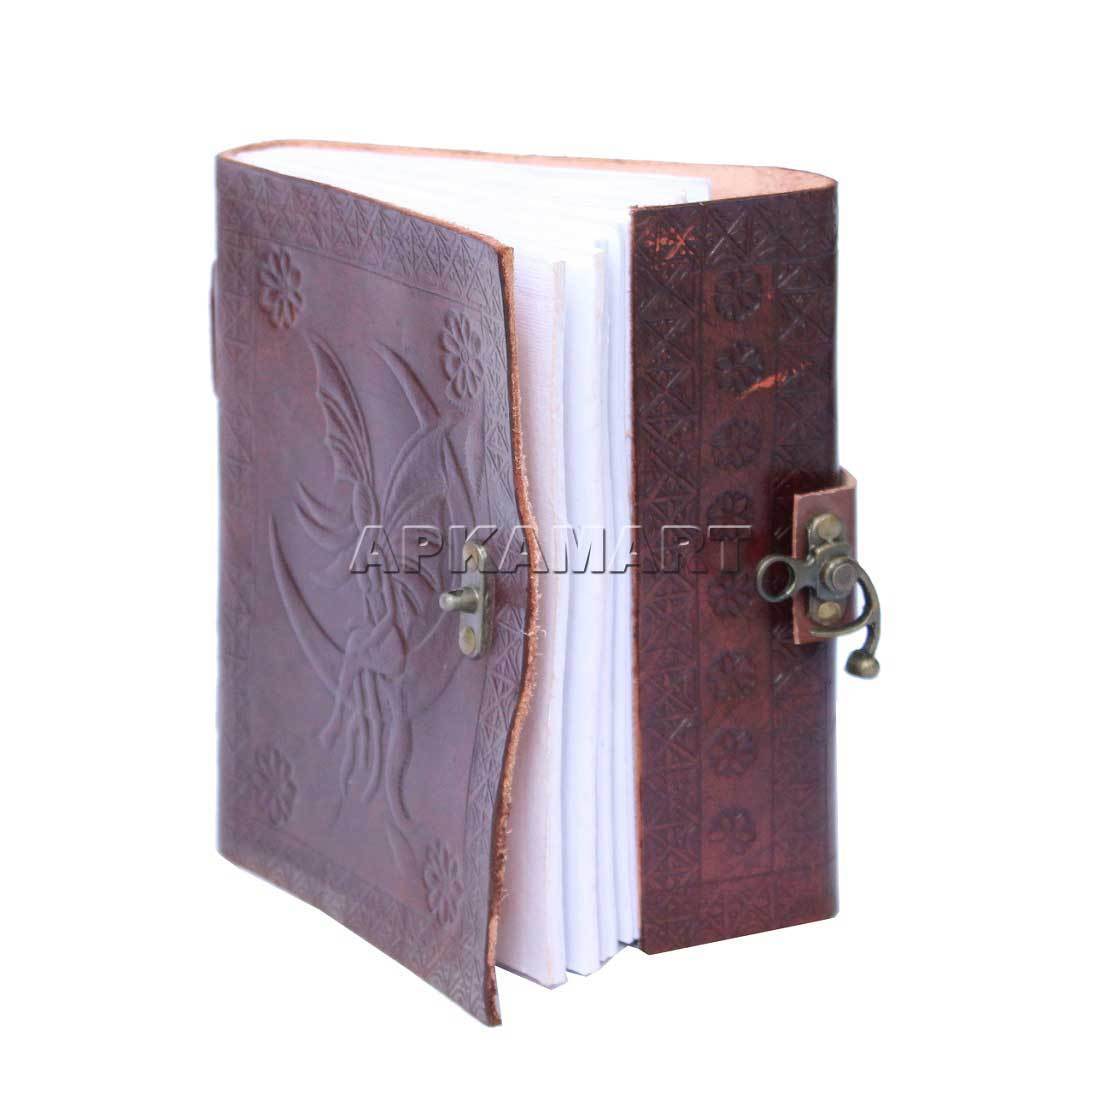 Personal Diary with Lock | Leather Journal - For Men & Women - 7 inch - ApkaMart